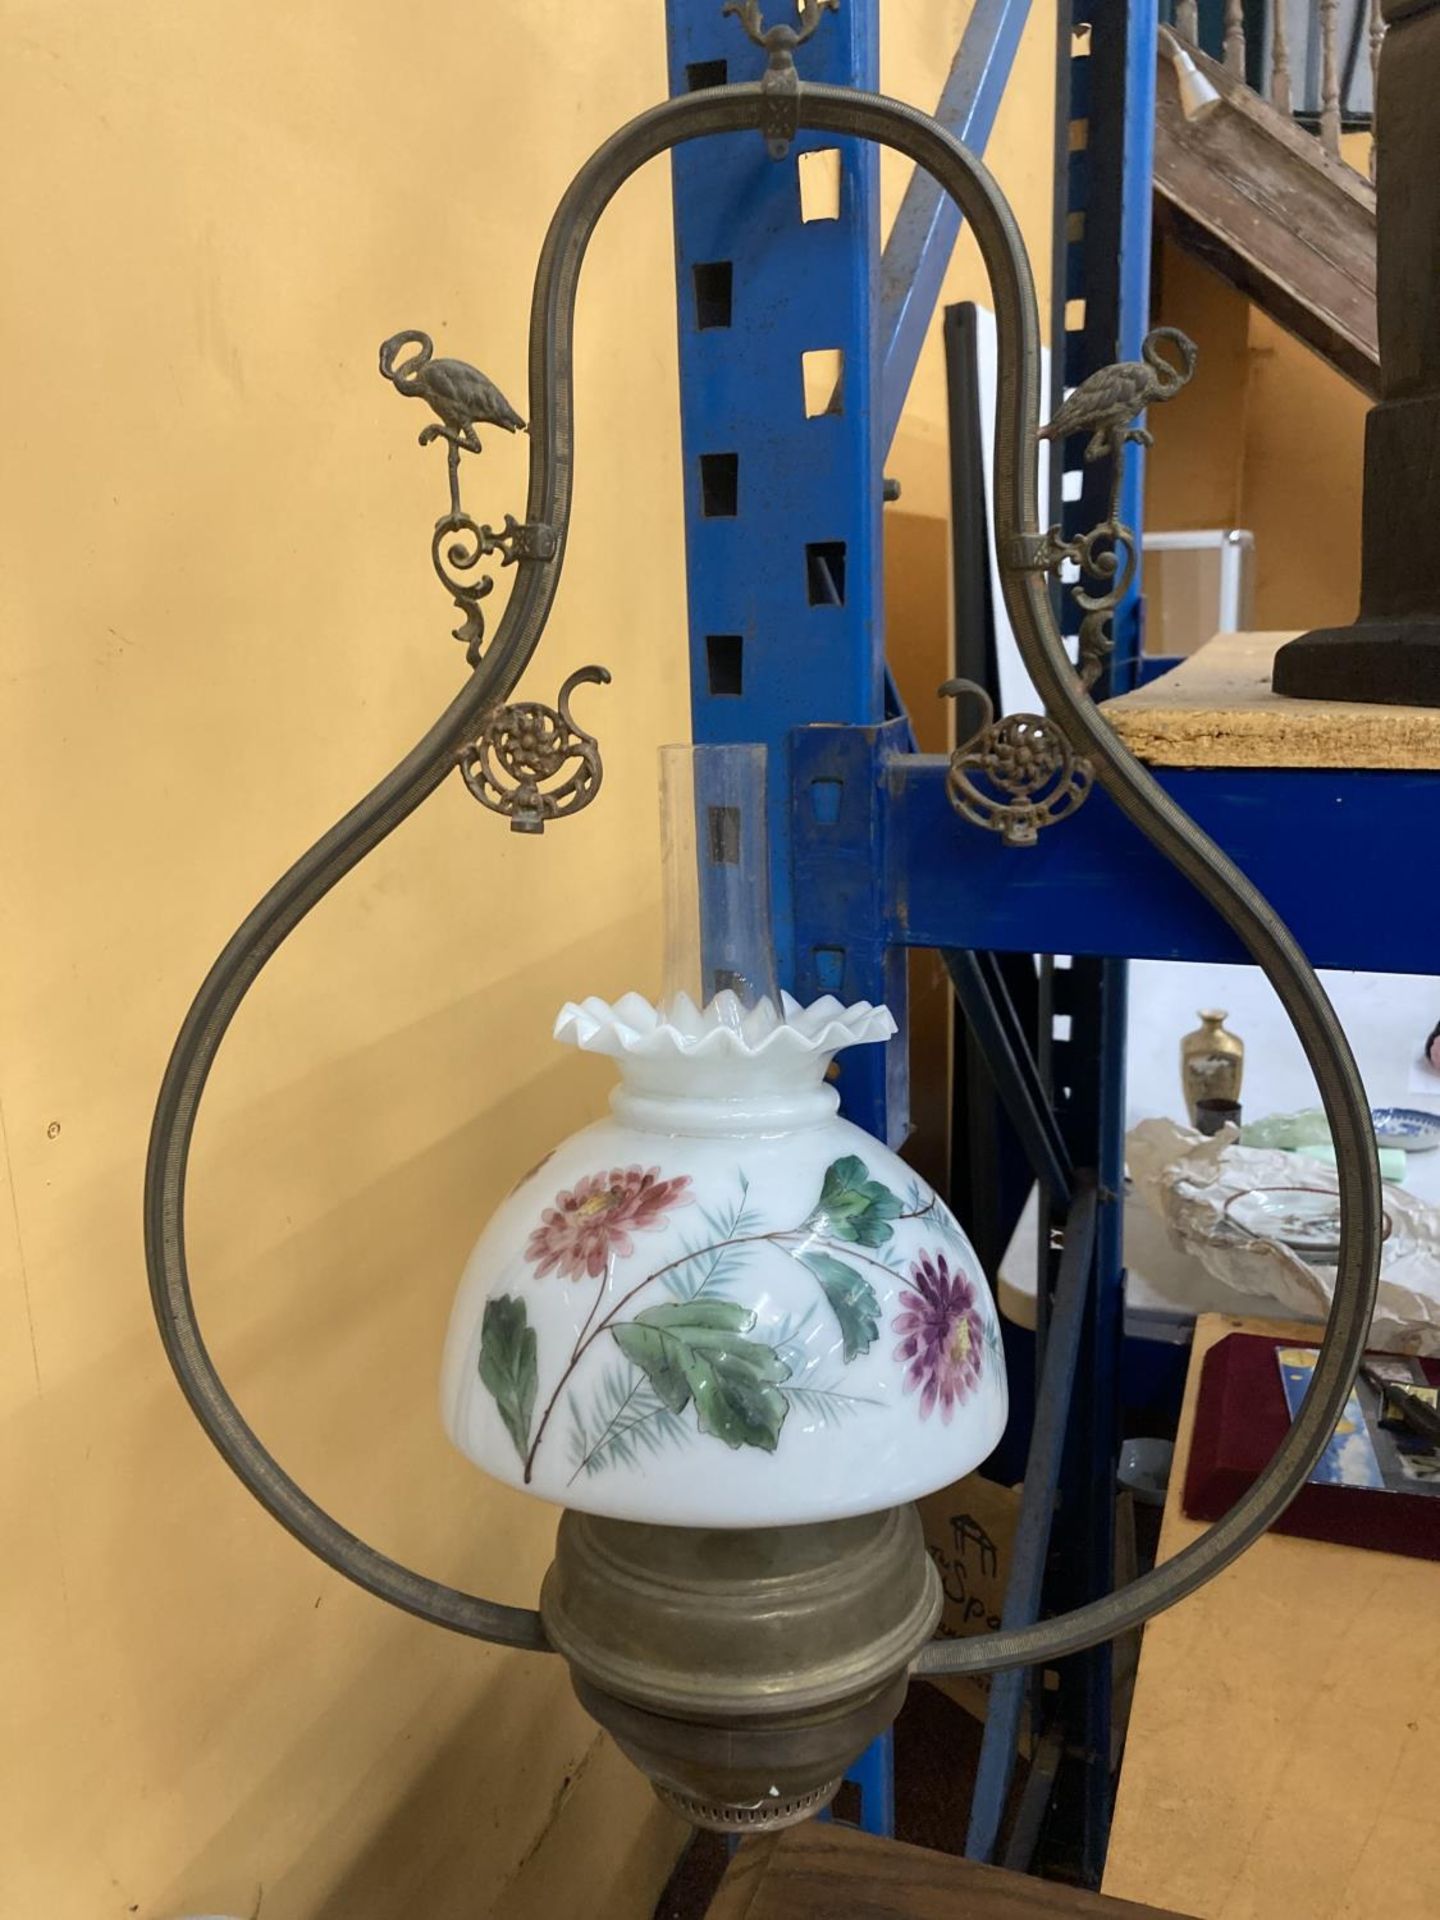 A VINTAGE HANGING OIL LAMP WITH PAINTED GLASS SHADE AND FLAMINGO DECORATION